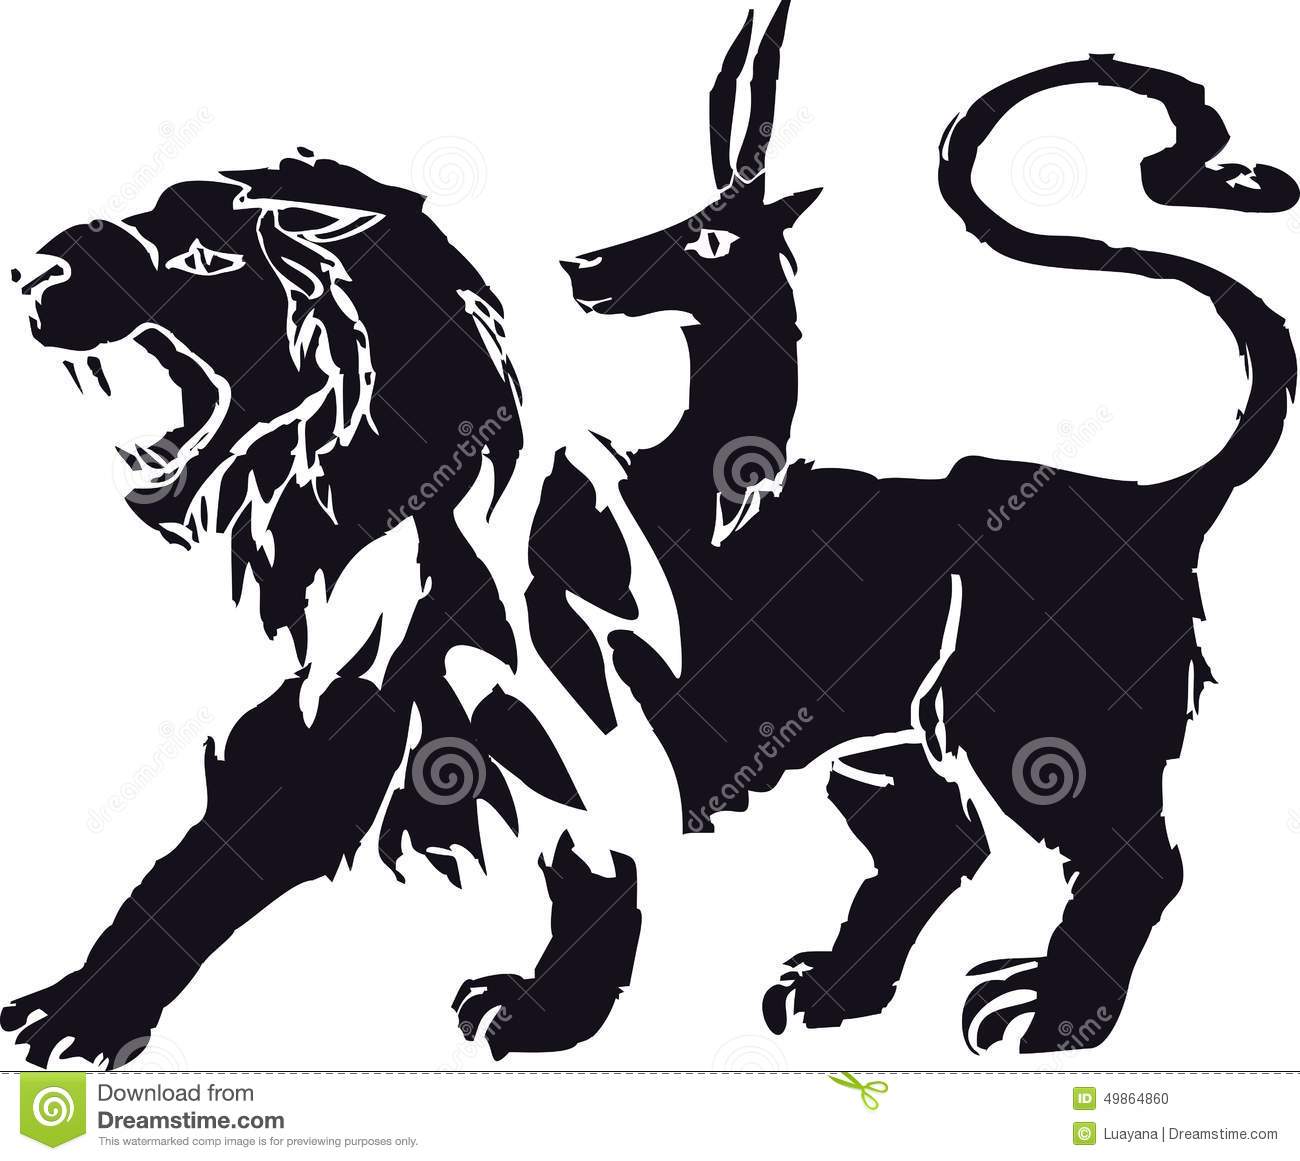 Chimera clipart #10, Download drawings